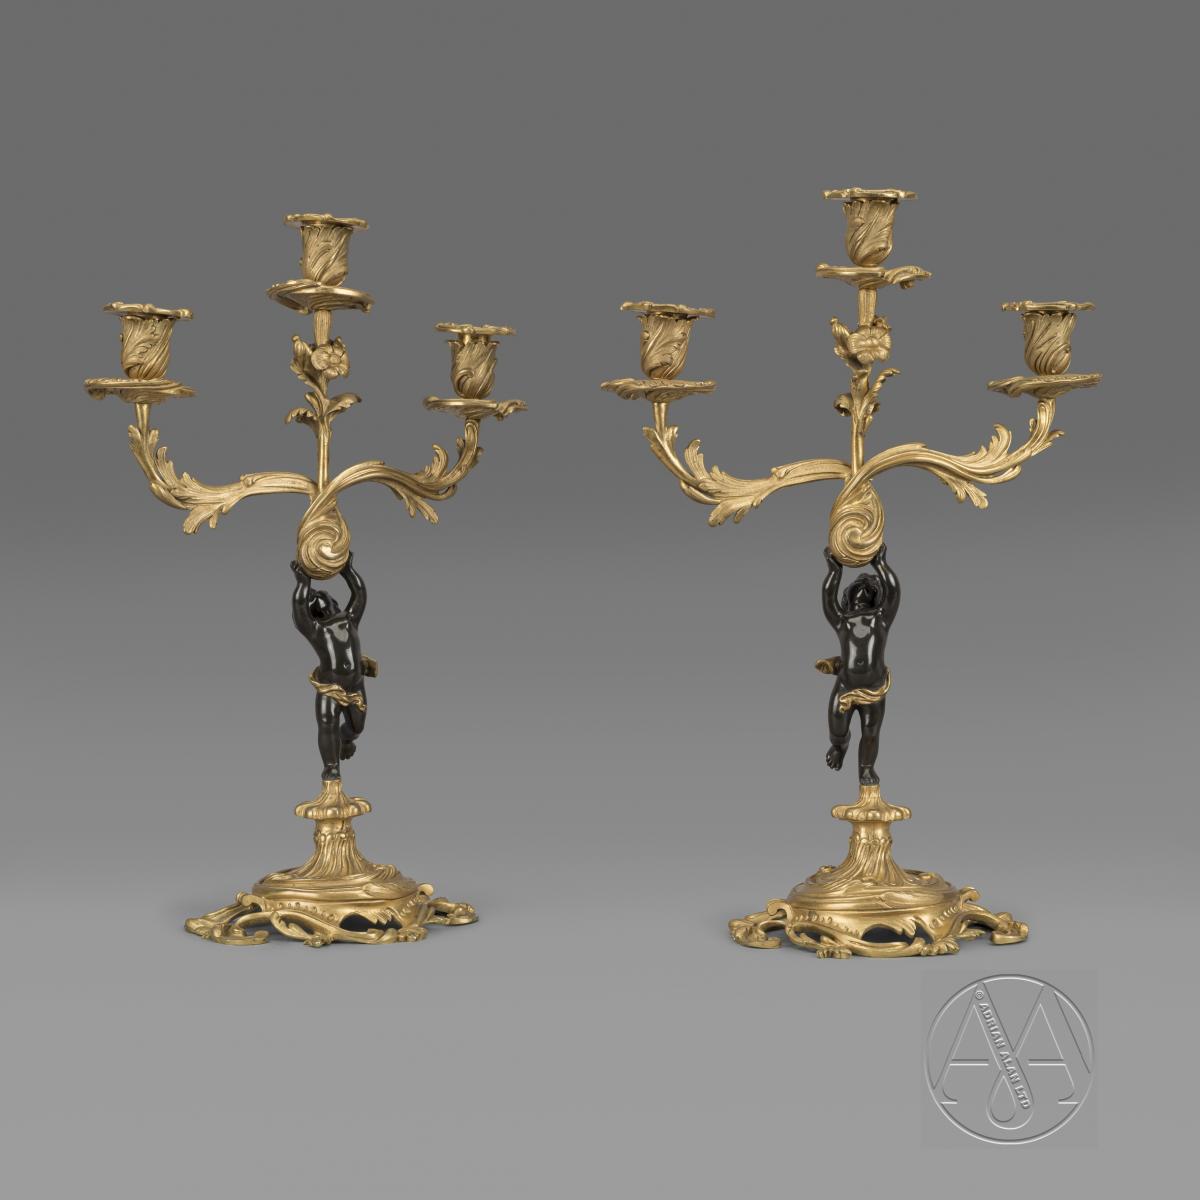 A Fine Louis XV Style Gilt and Patinated Bronze Figural Clock Garniture by Maison Baguès. French, Circa 1870.